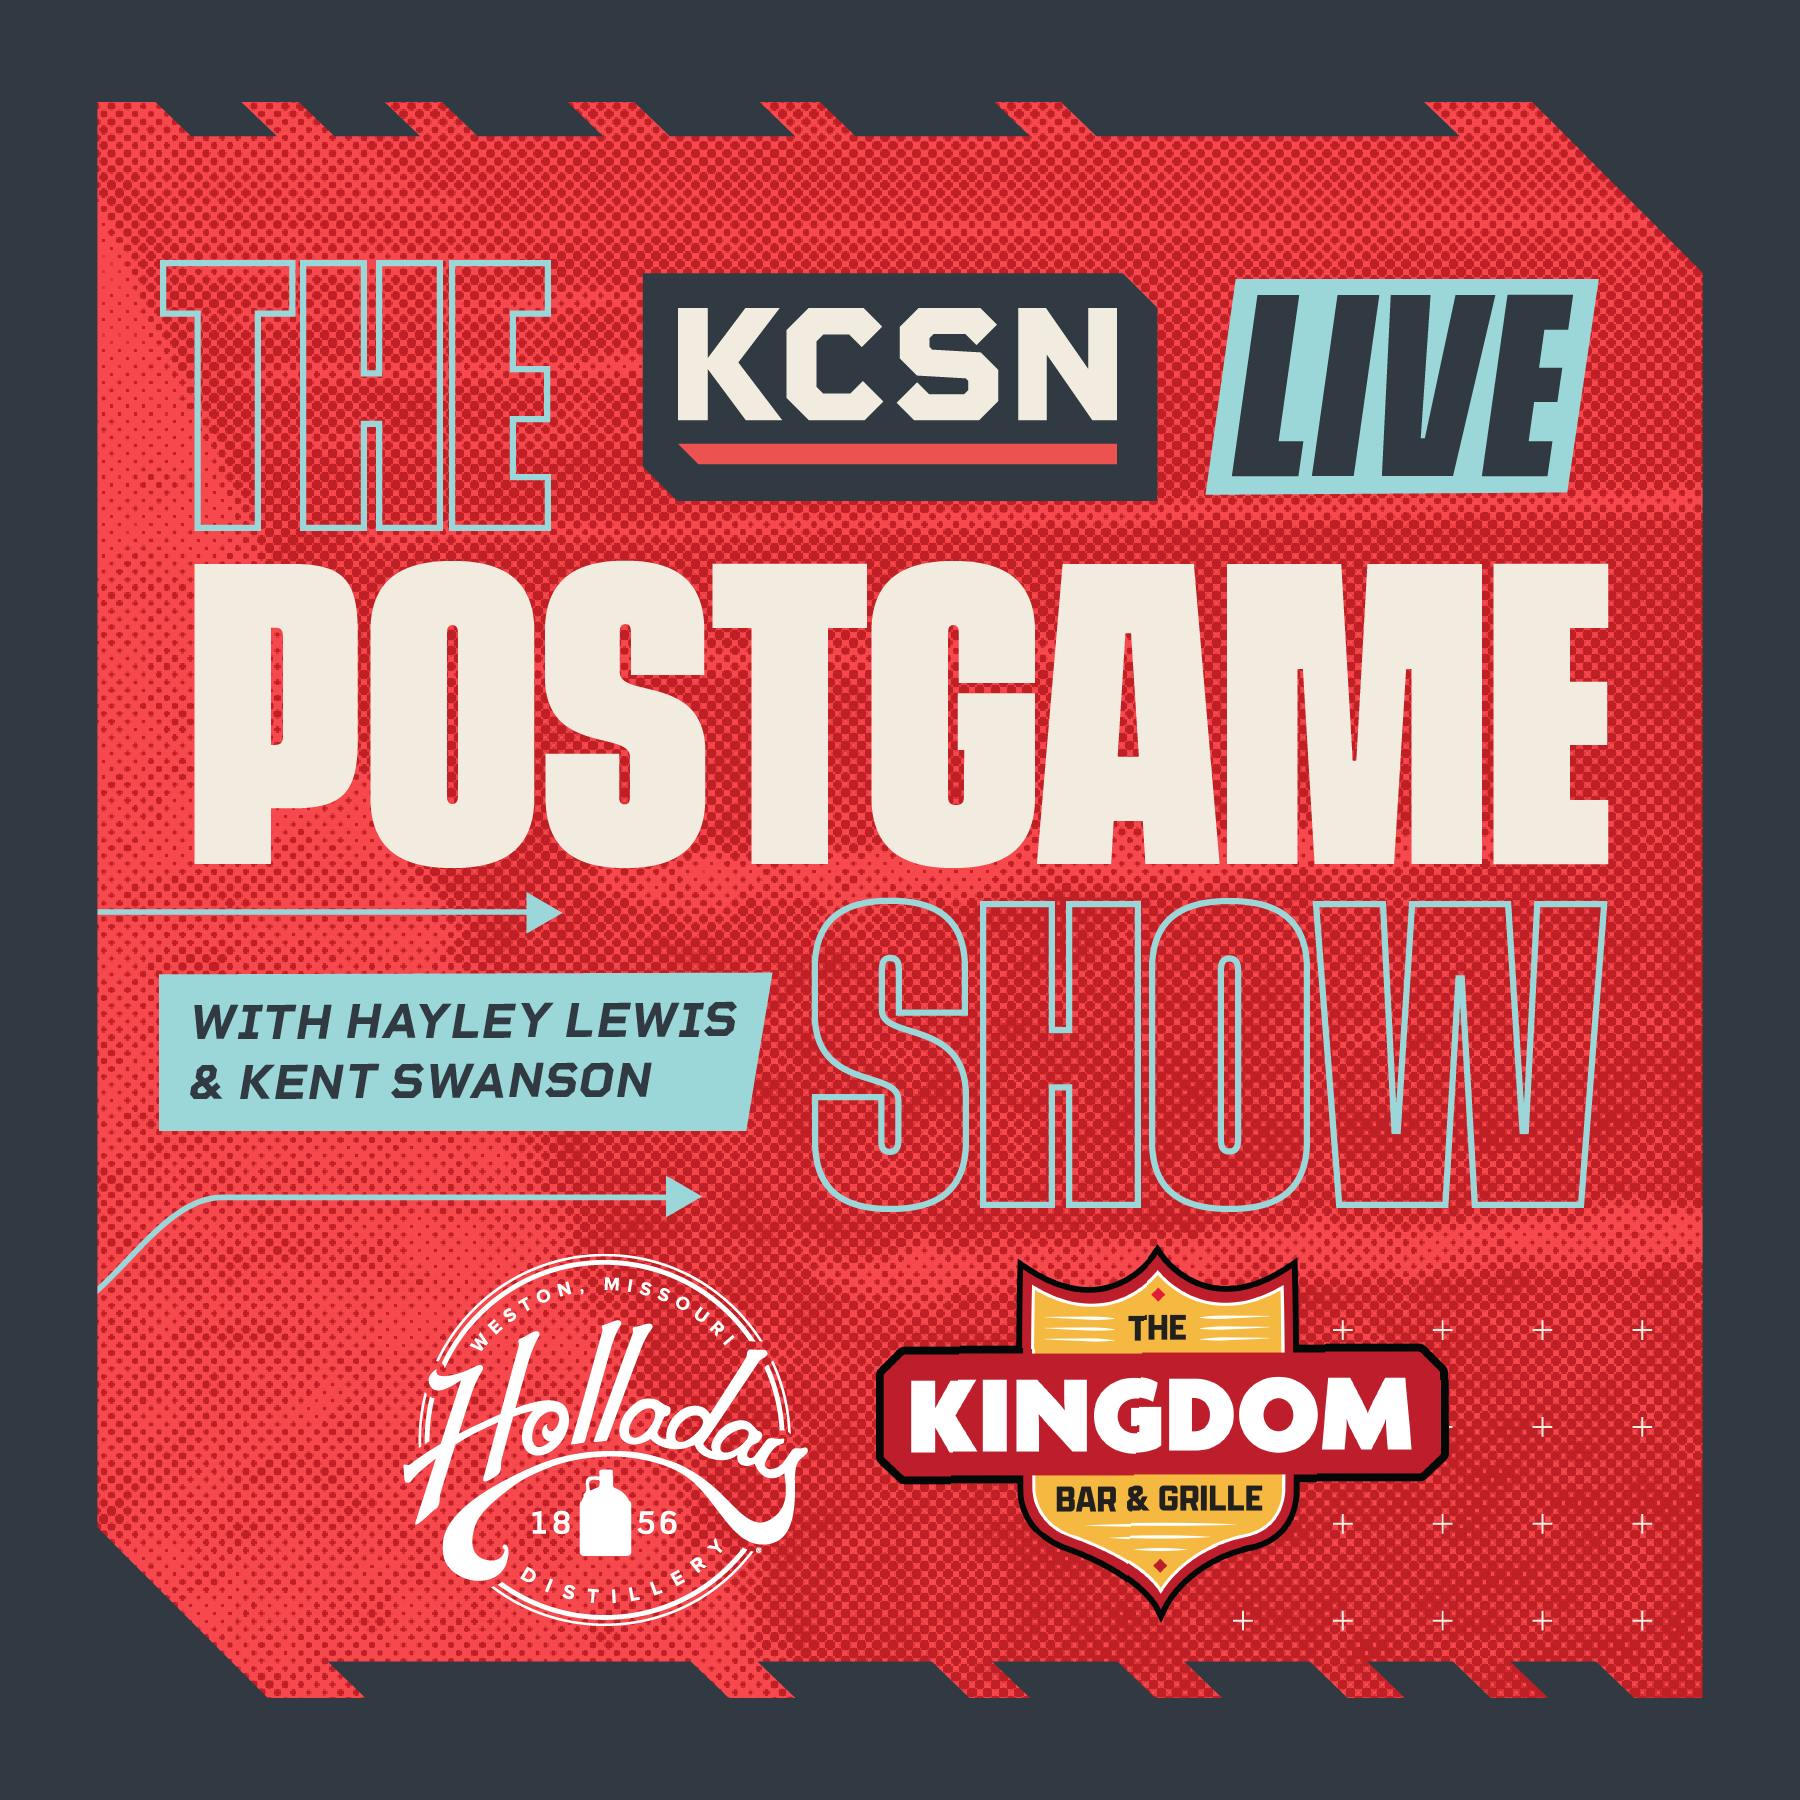 KCSN Live Postgame Show 11/26: Chiefs Offense Gets Going in 31-17 Win vs. Raiders